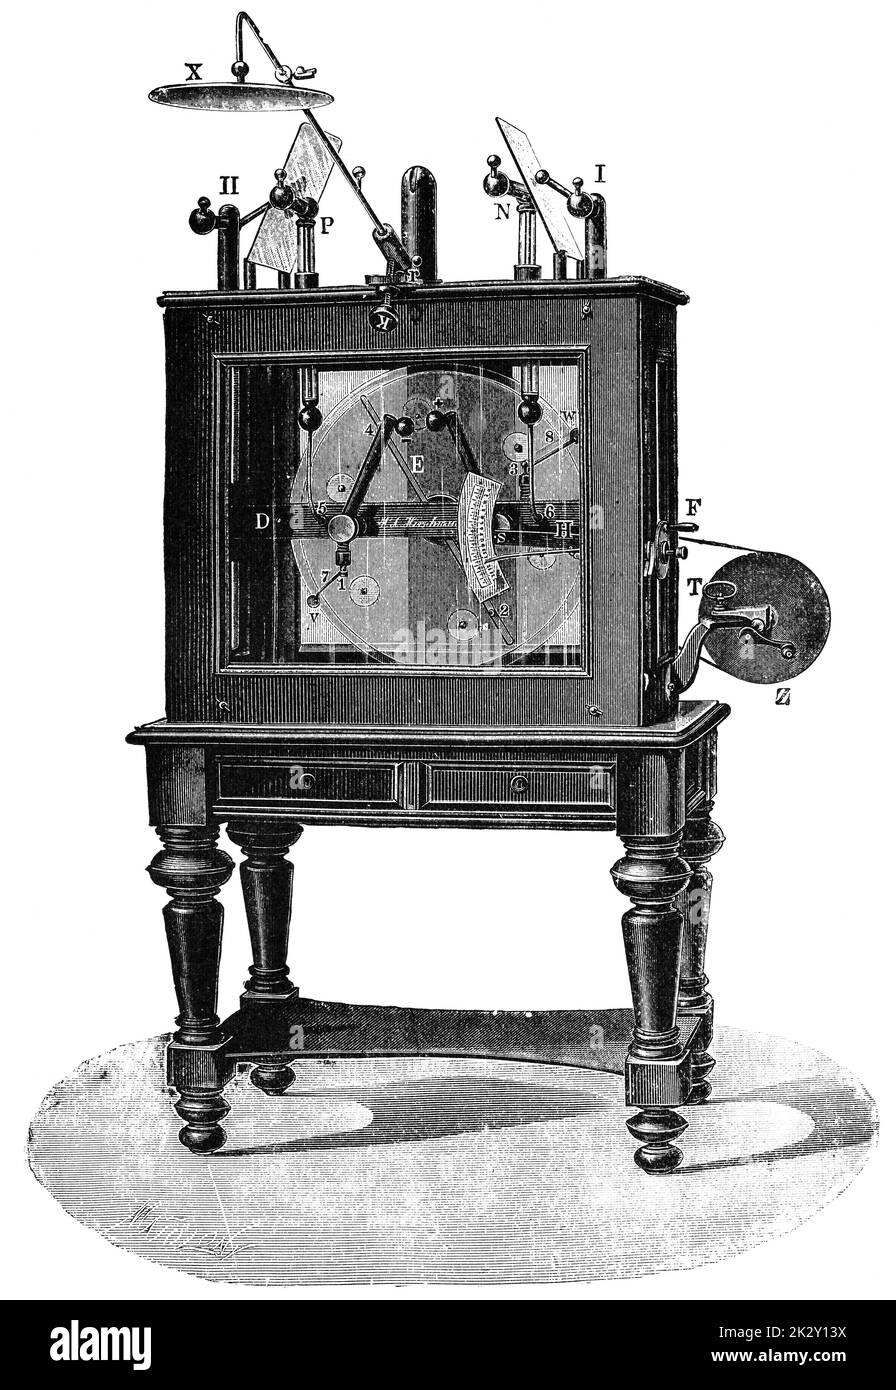 Influence machine for electrotherapy. Illustration of the 19th century. Germany. White background. Stock Photo